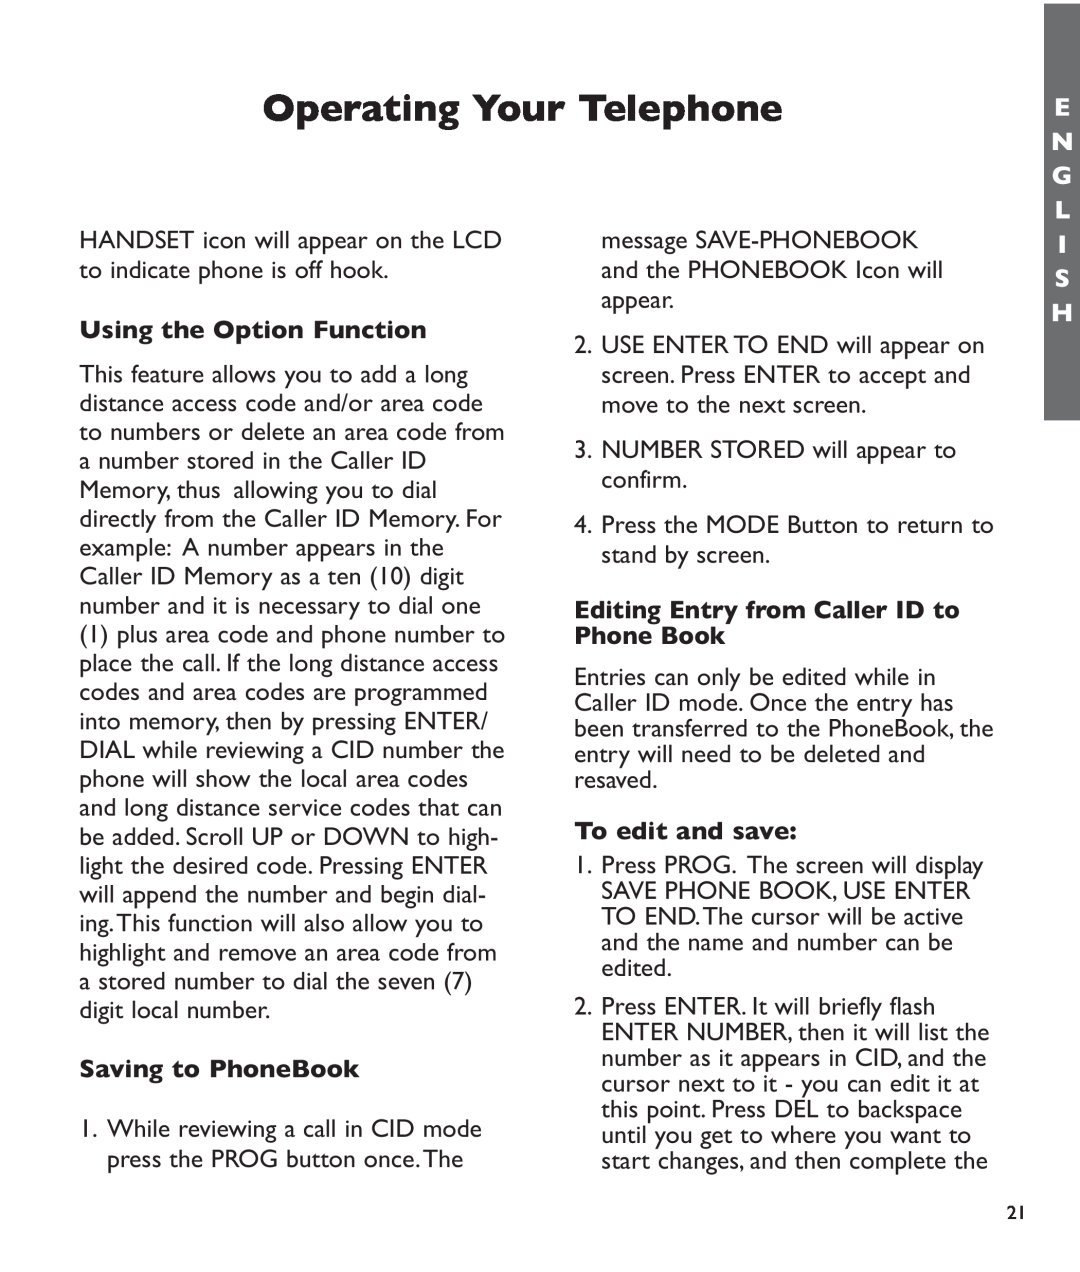 Clarity c2210 Using the Option Function, Saving to PhoneBook, Editing Entry from Caller ID to Phone Book, To edit and save 